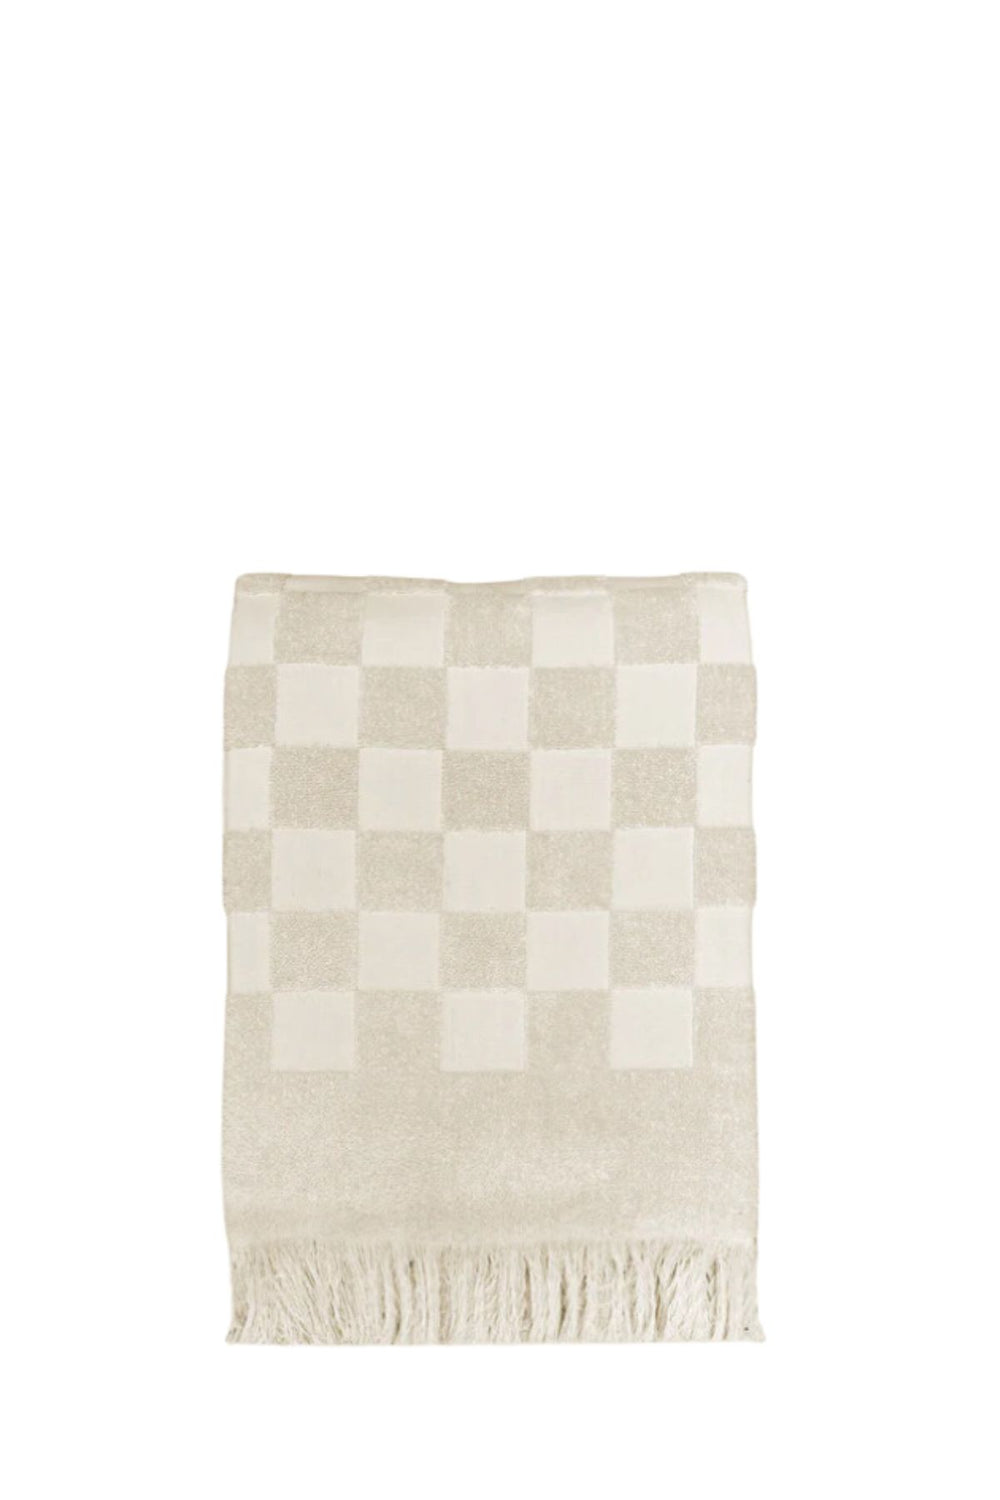 Poolside Checkered  Beach Towel - Happy Place